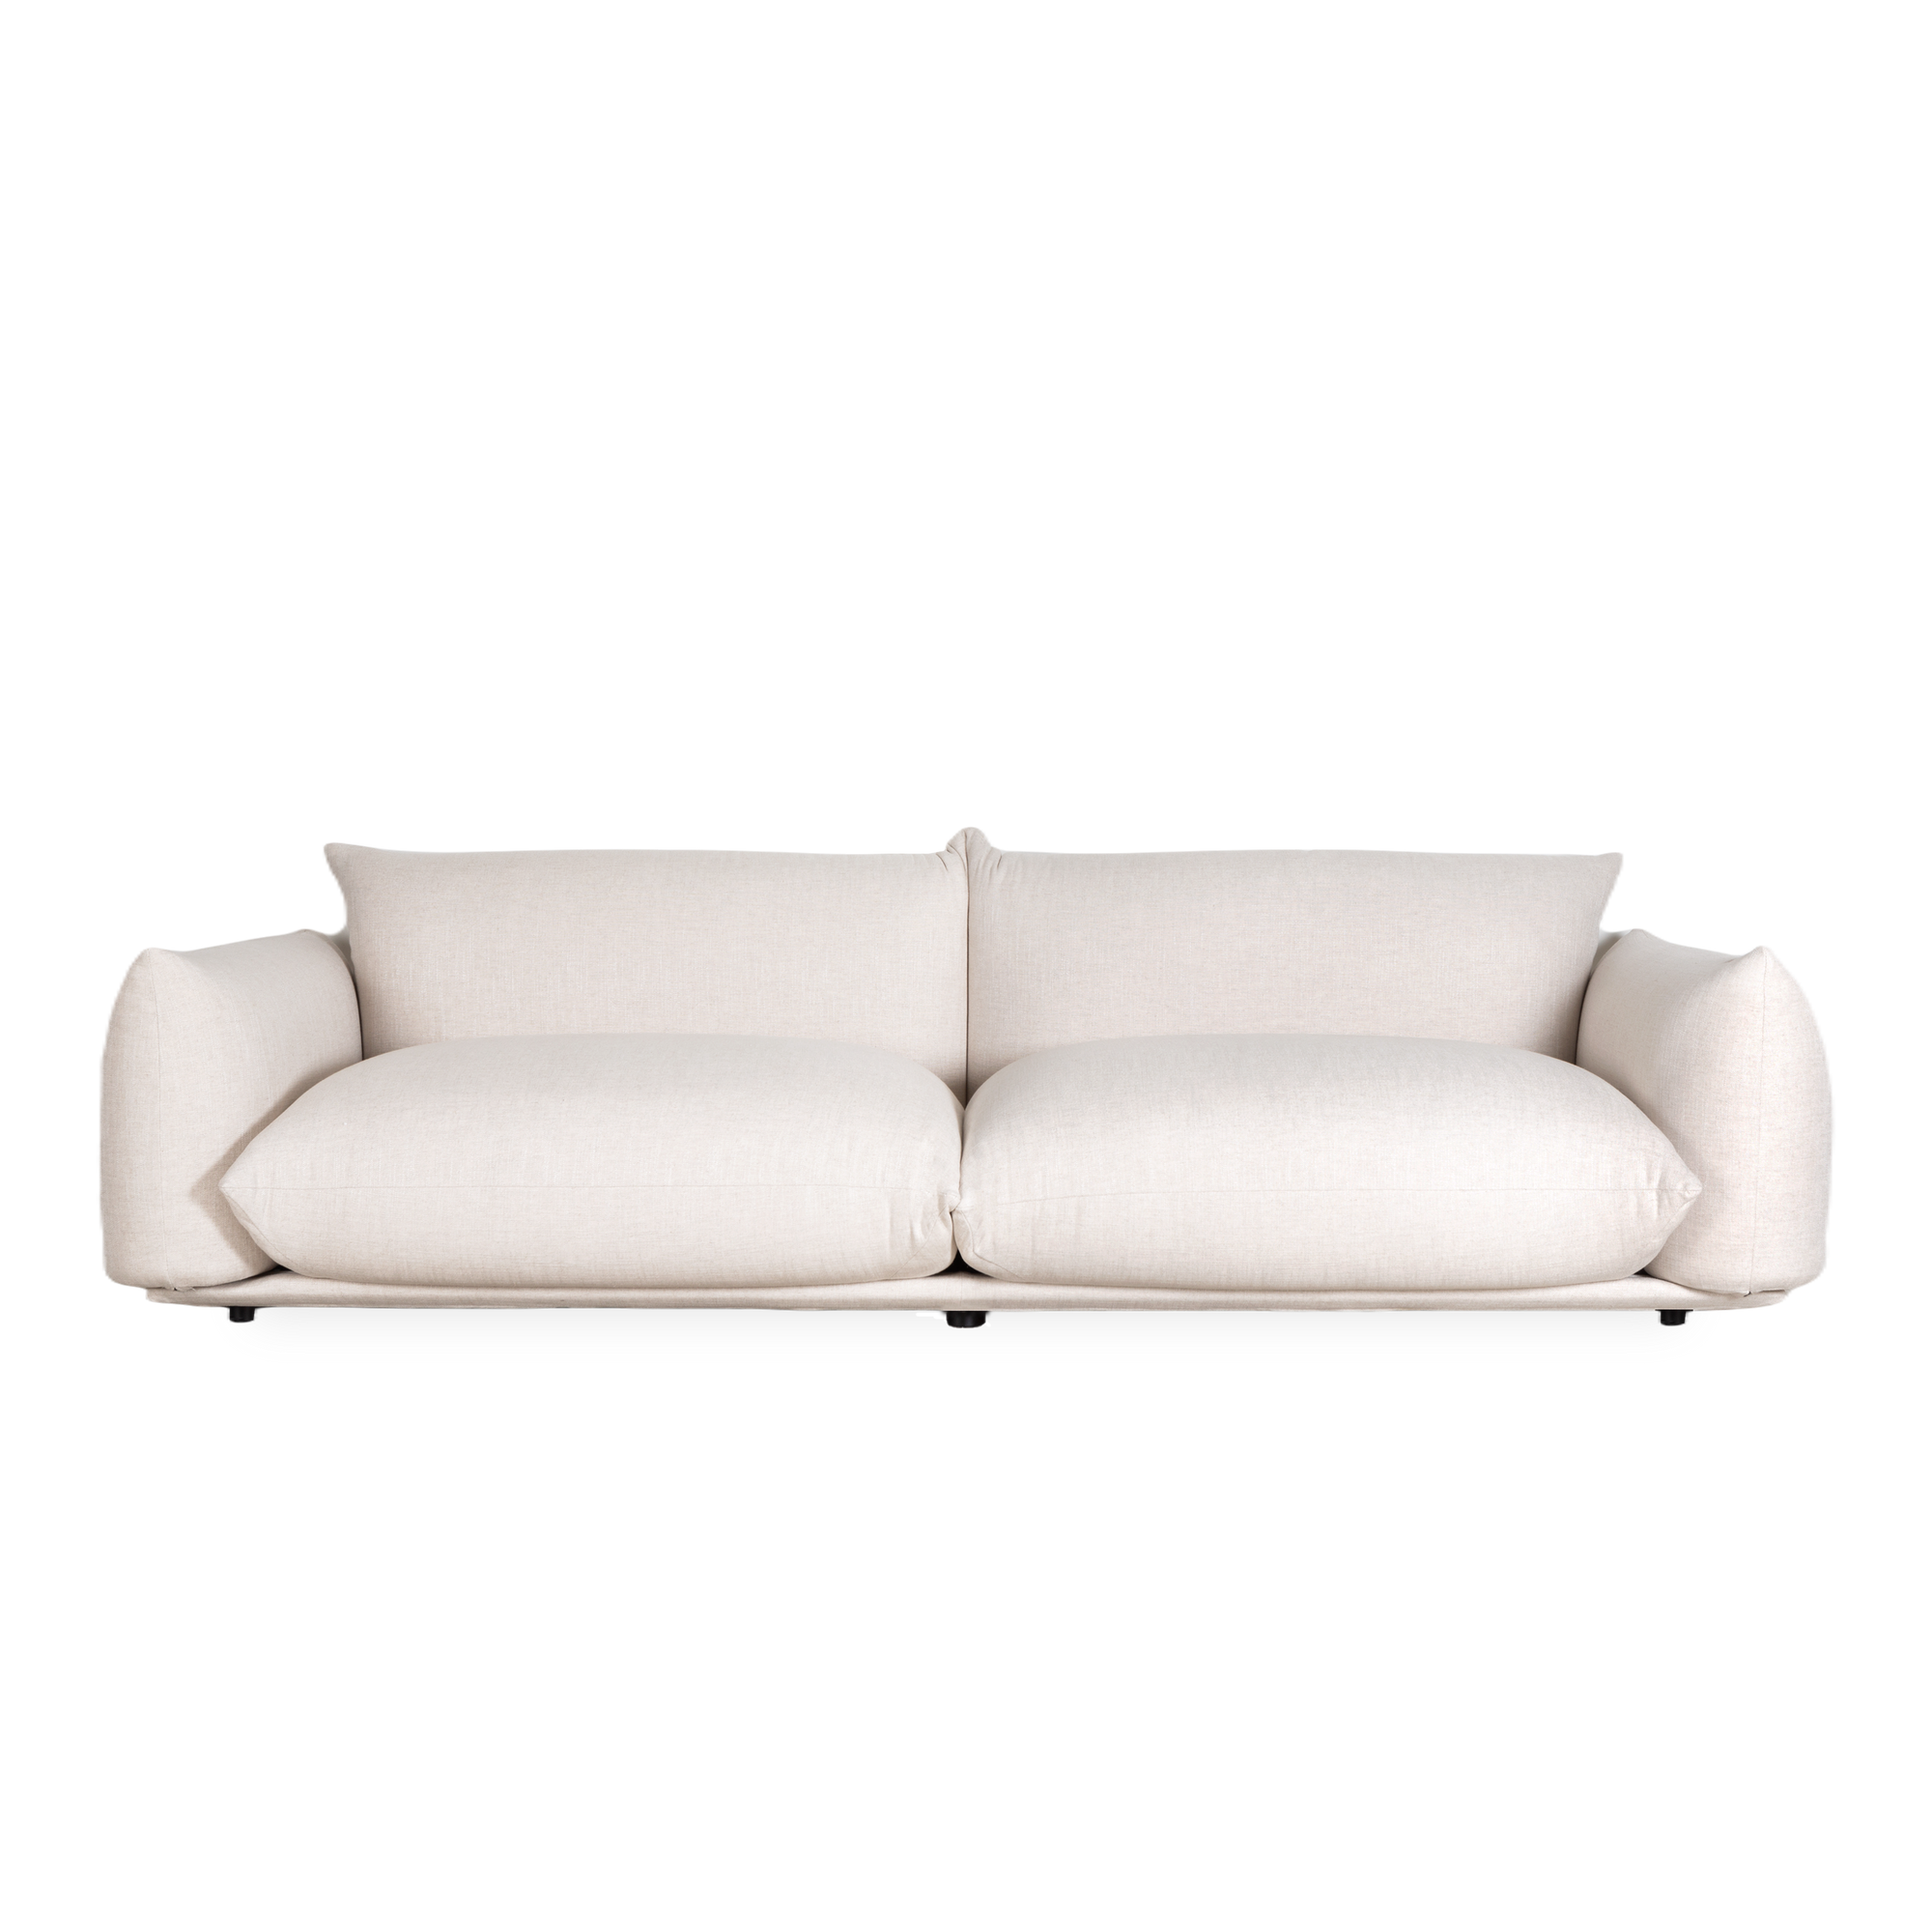 The Marenco Sofa transcends conventional boundaries and embodies a perfect fusion of form, function, and unparalleled comfort.